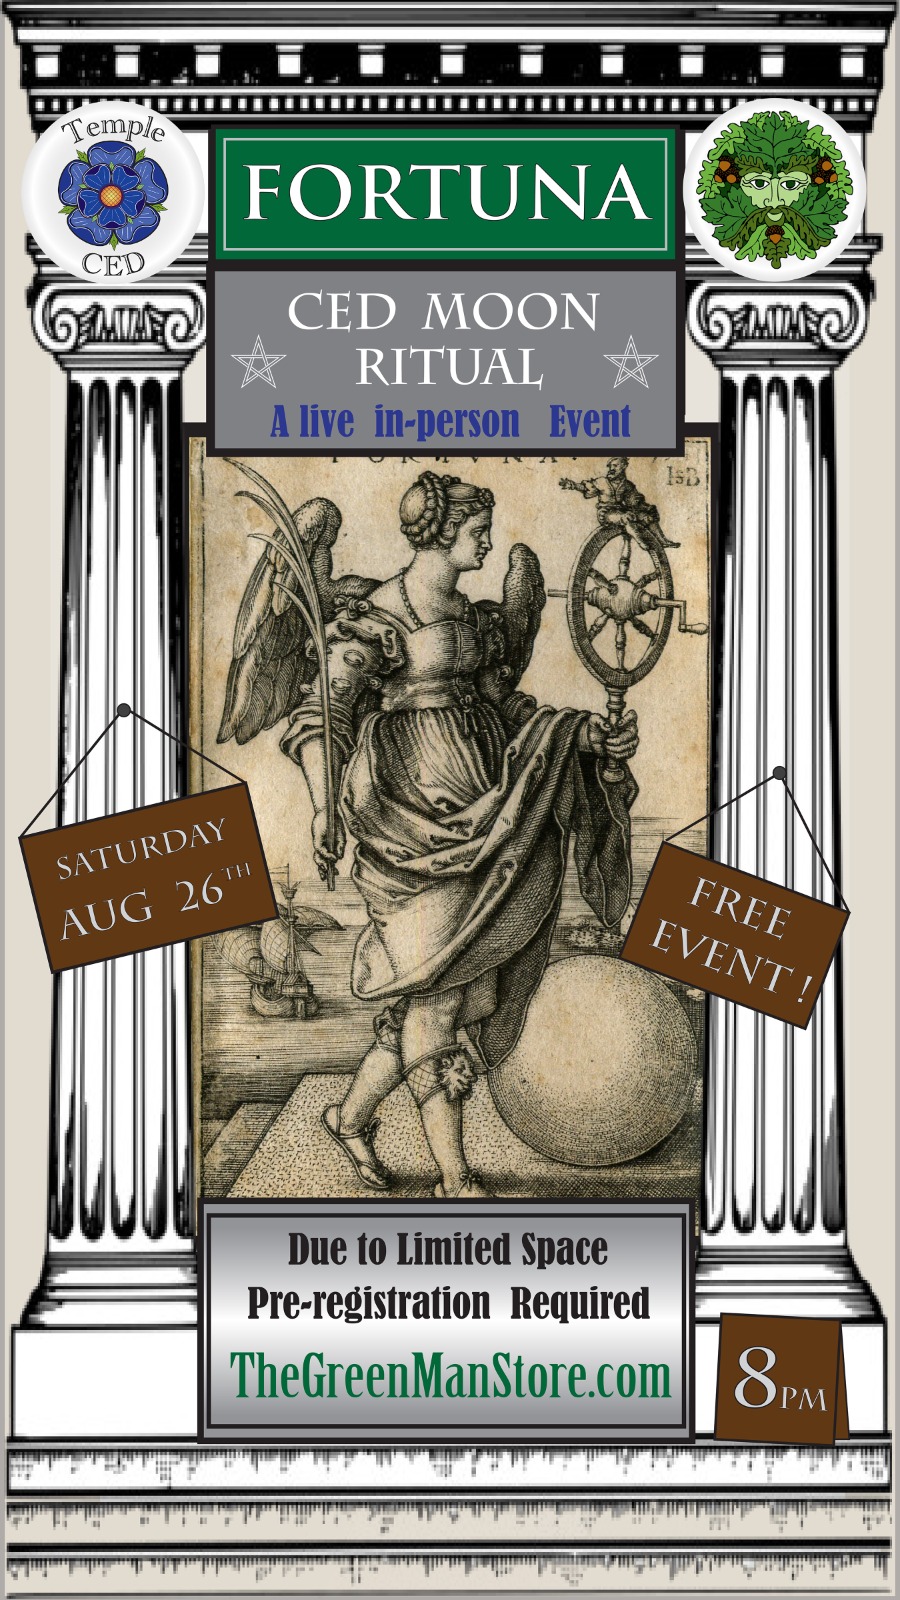 Free Fortuna Ritual with The Temple of Ced